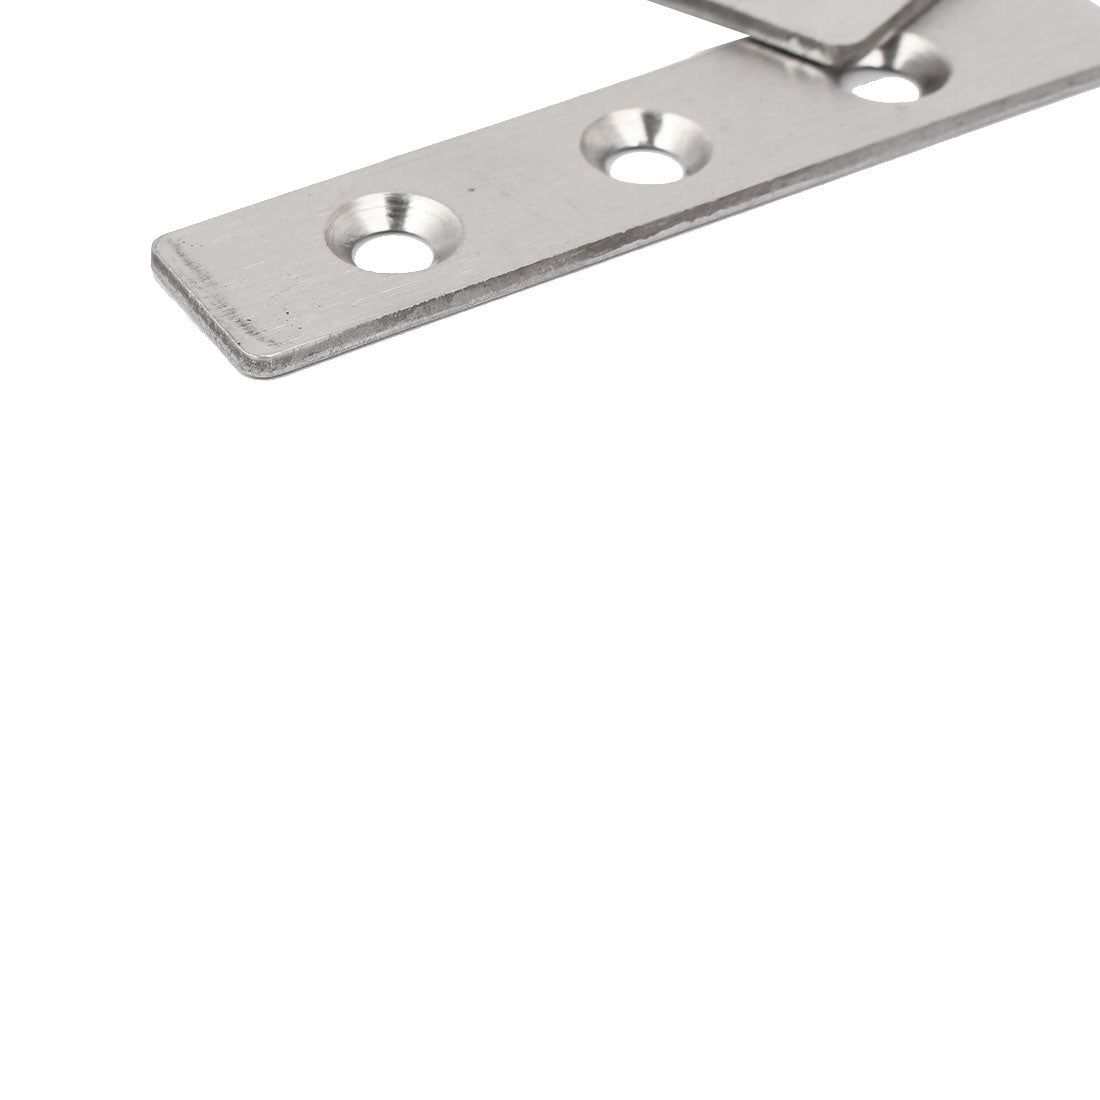 uxcell Uxcell Cabinet Door Box Stainless Steel Inset Offset Pivot Hinge 64mm x 21.5mm 15PCS